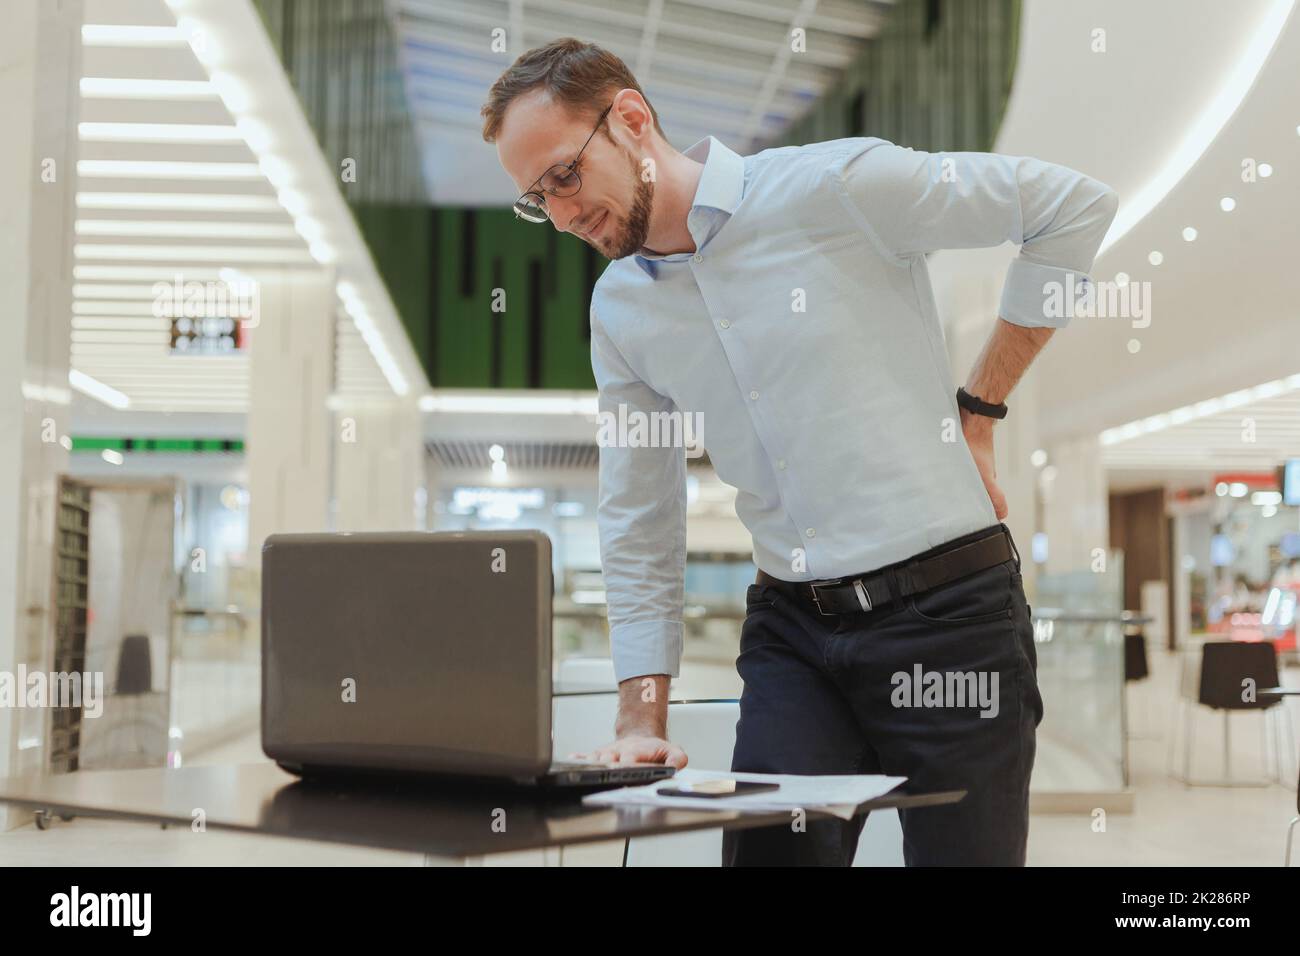 Man holds on to his back, suffers from lower back pain, standing near a desktop with a computer. Sedentary work office worker Stock Photo